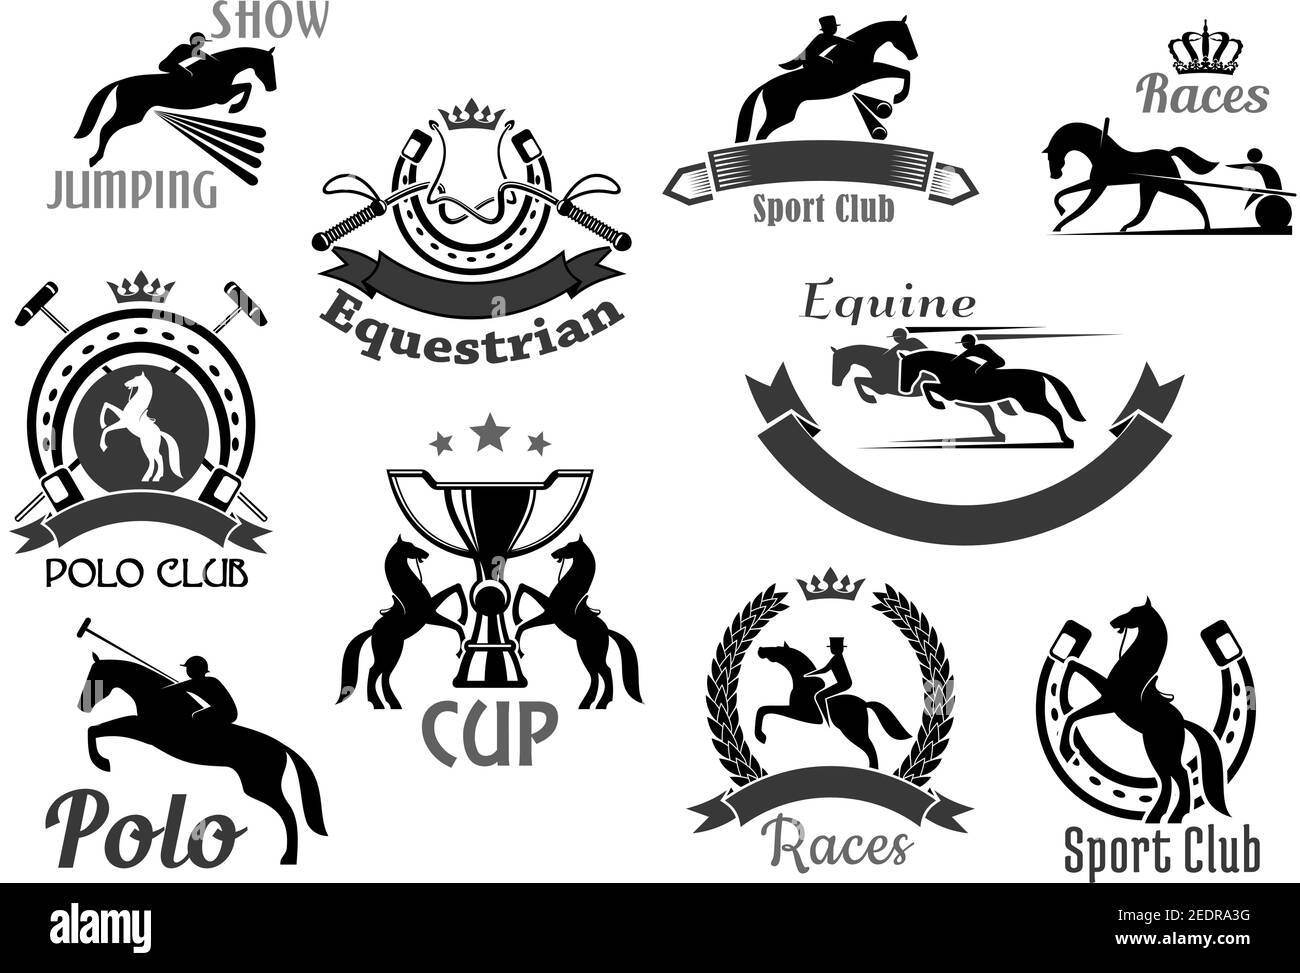 Horse races or equine sport club vector icons. Emblems of polo game, equestrian jump show or racing with symbols of horseshoe, rider winner or horsera Stock Vector